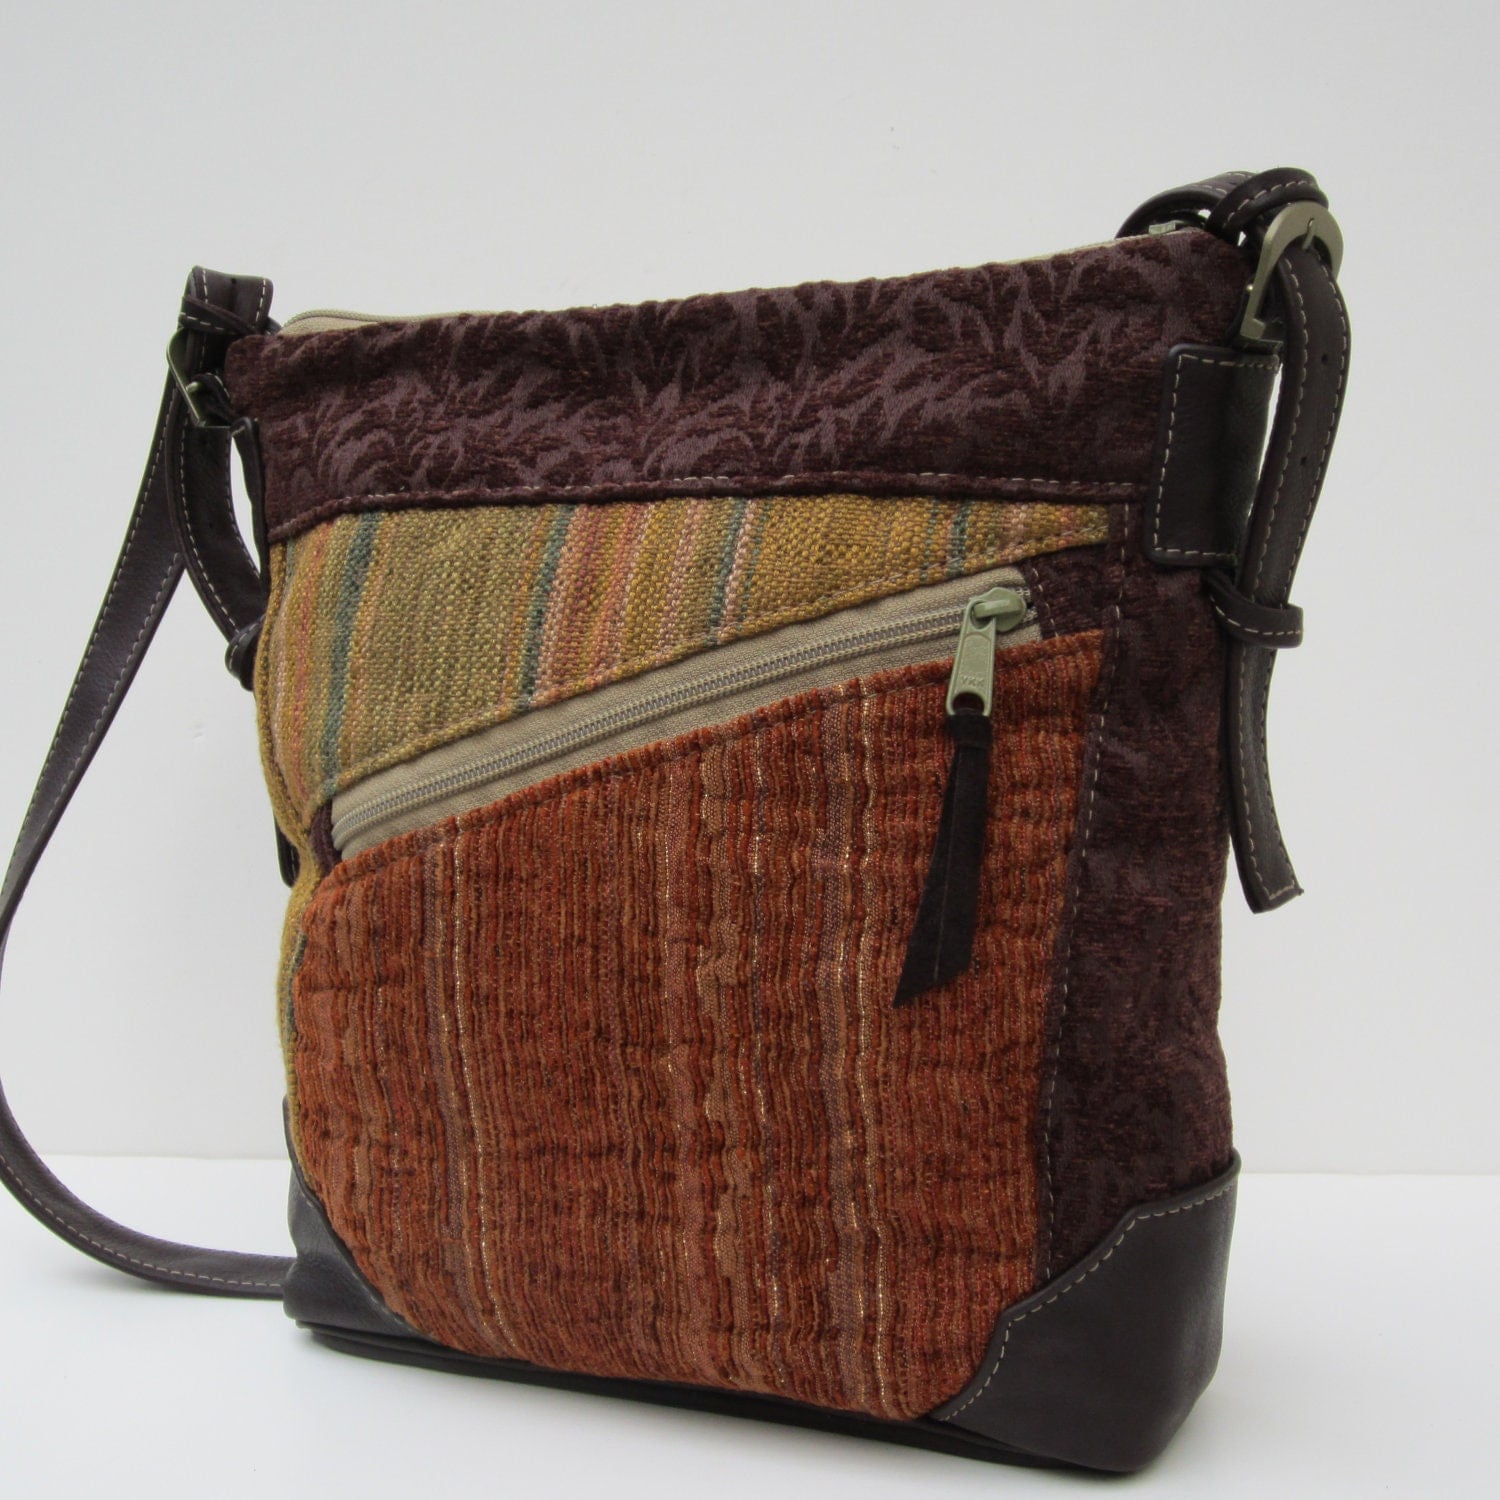 LARGE SHOULDER BAG Fabric with Leather Eclectic Medley